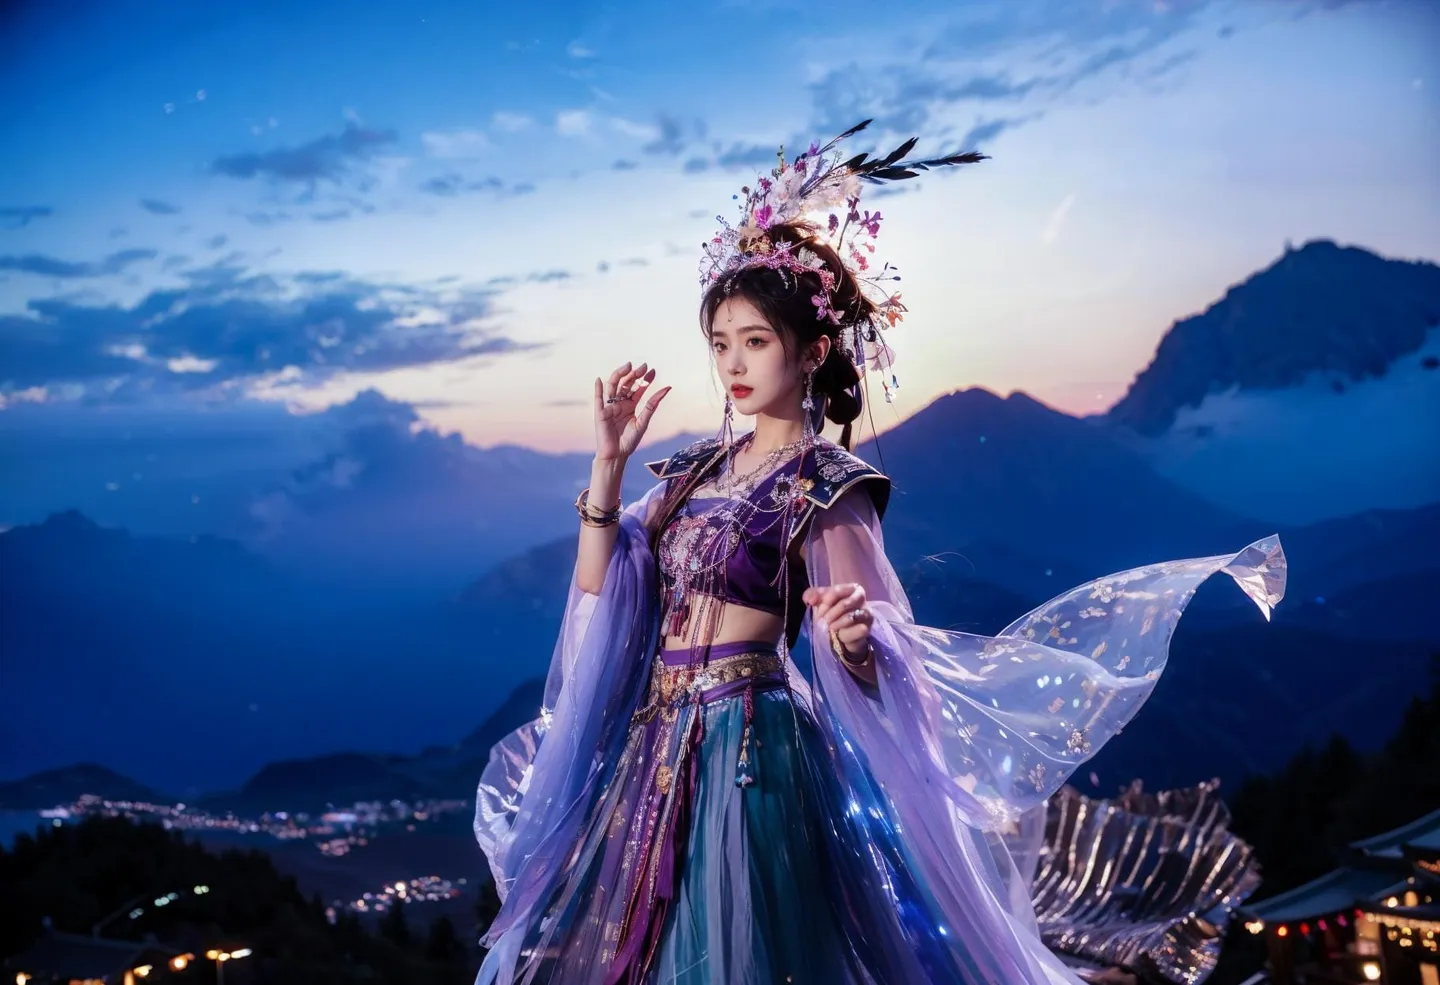 An ethereal woman in an elaborate traditional Chinese attire with a mountain backdrop. AI-generated image using stable diffusion.